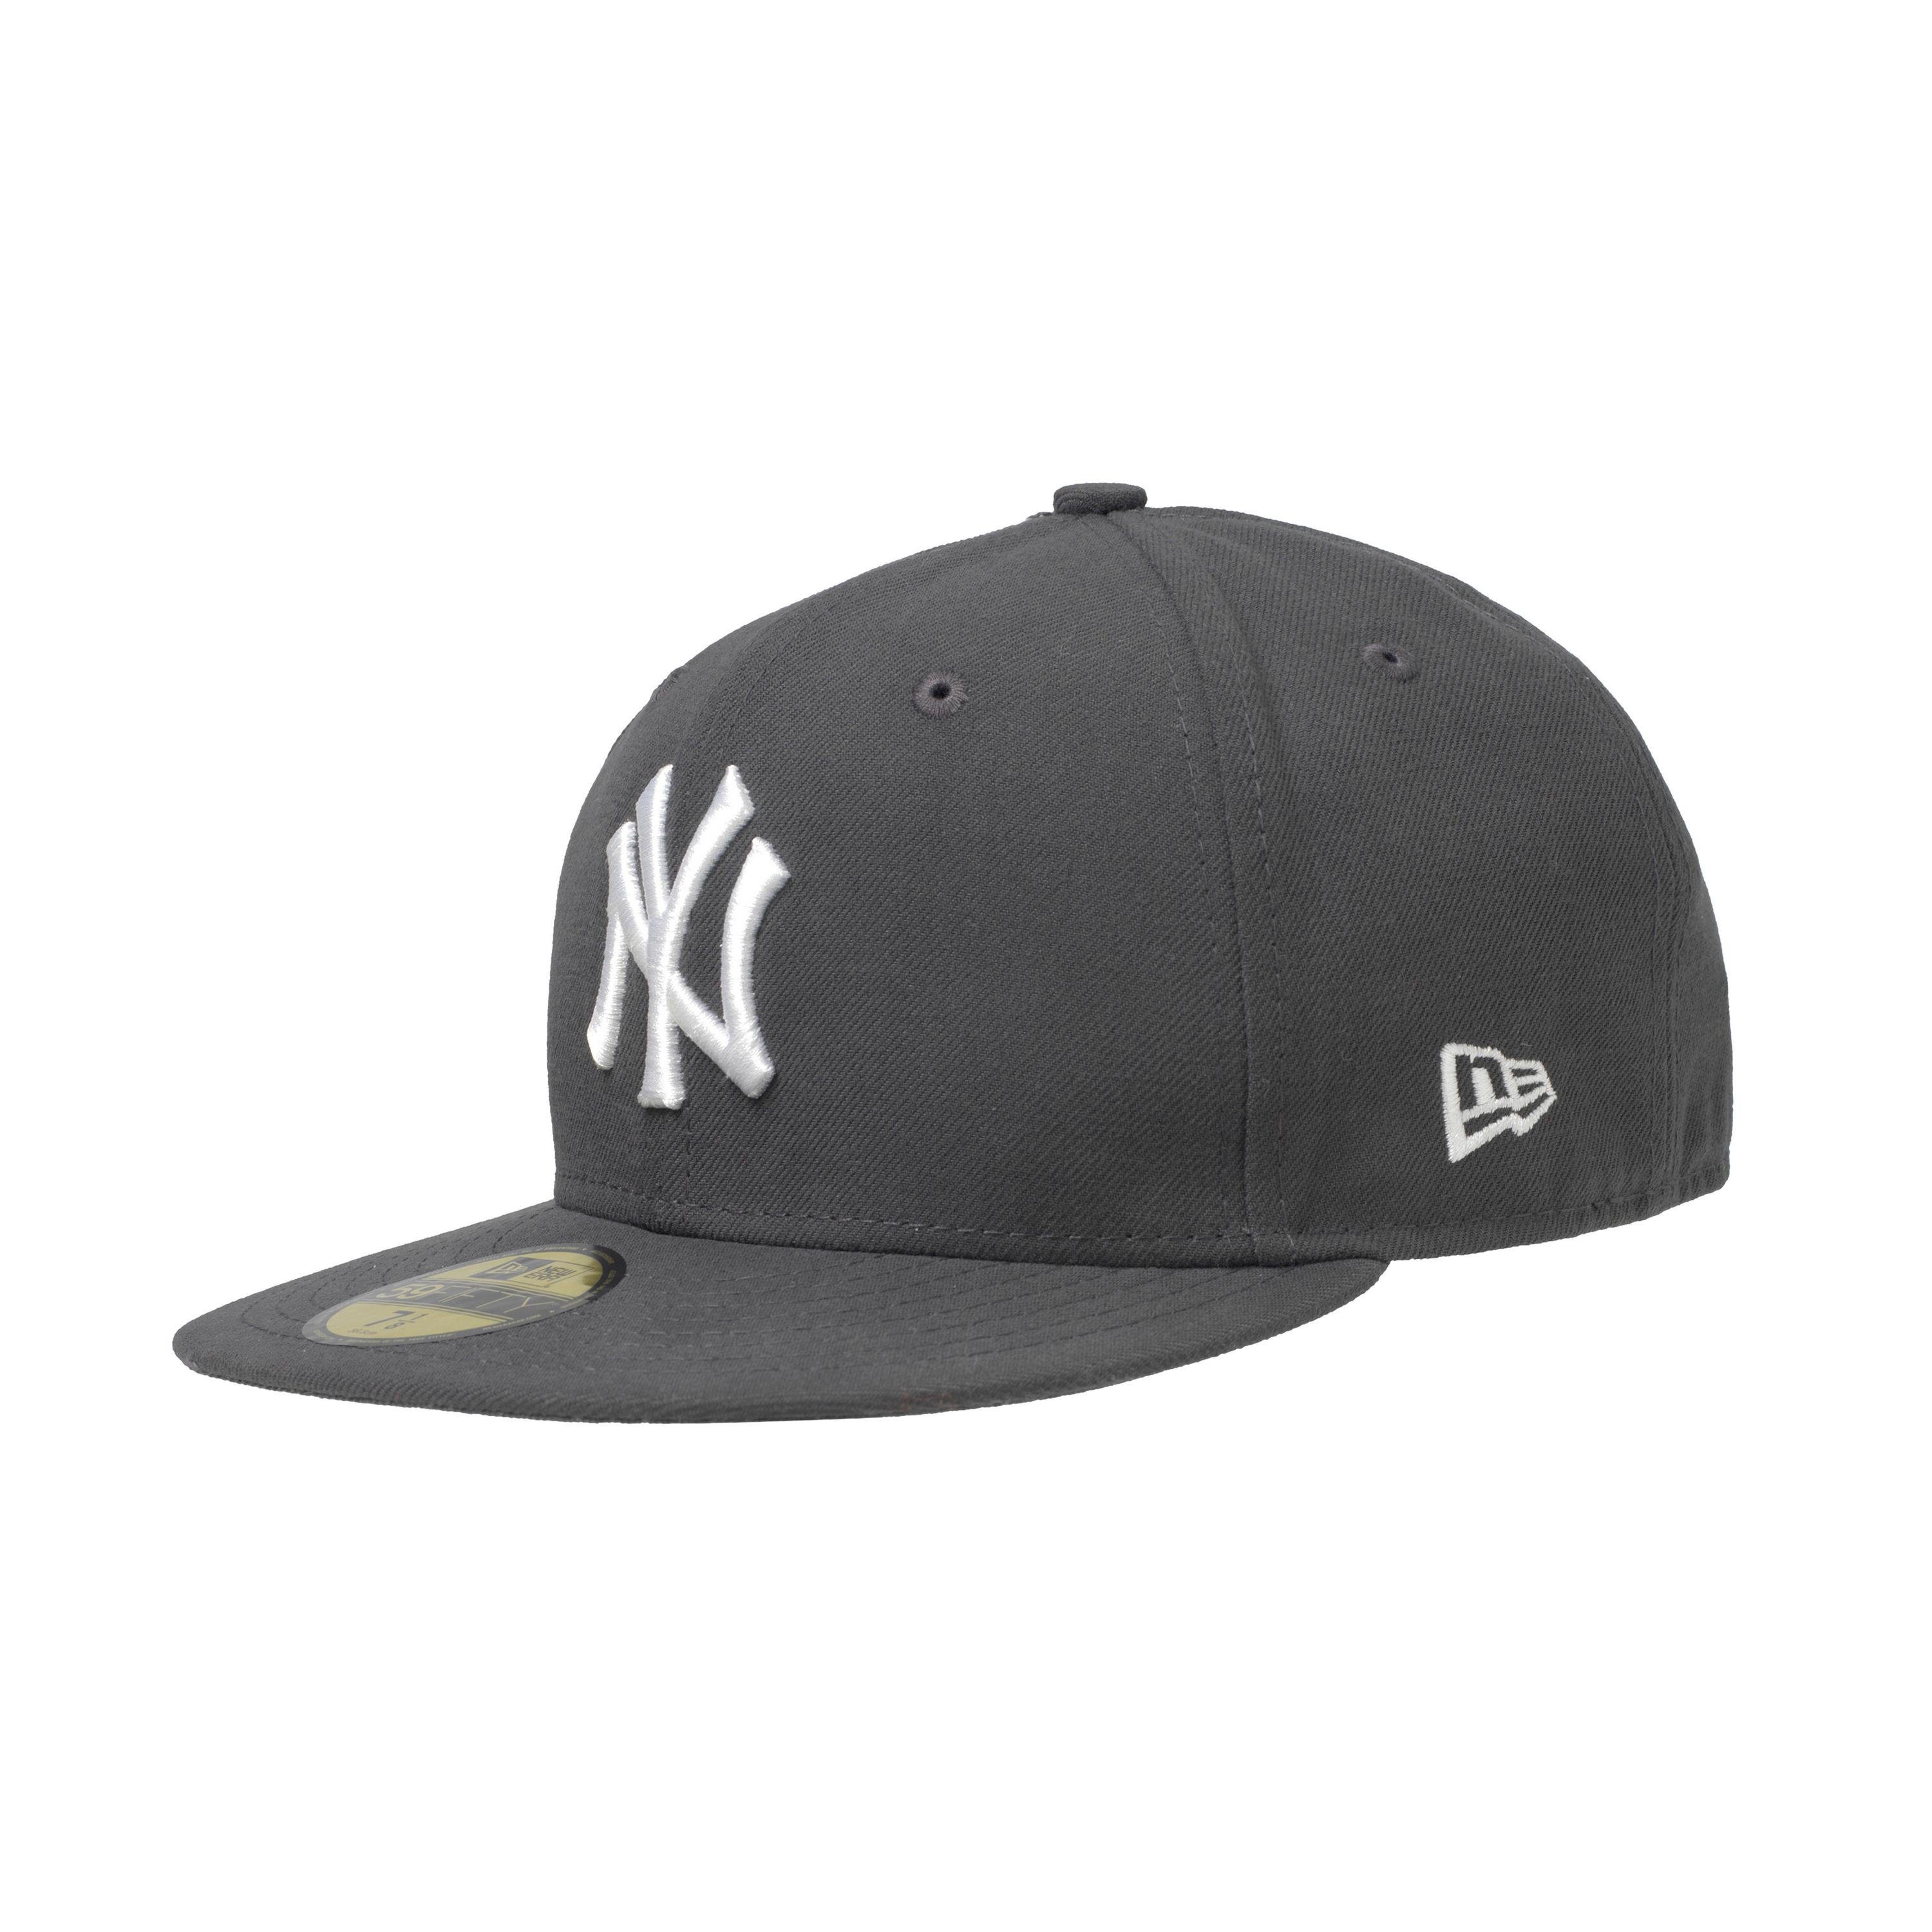 New Era Fitted Cap 59Fifty New York Yankees charcoal